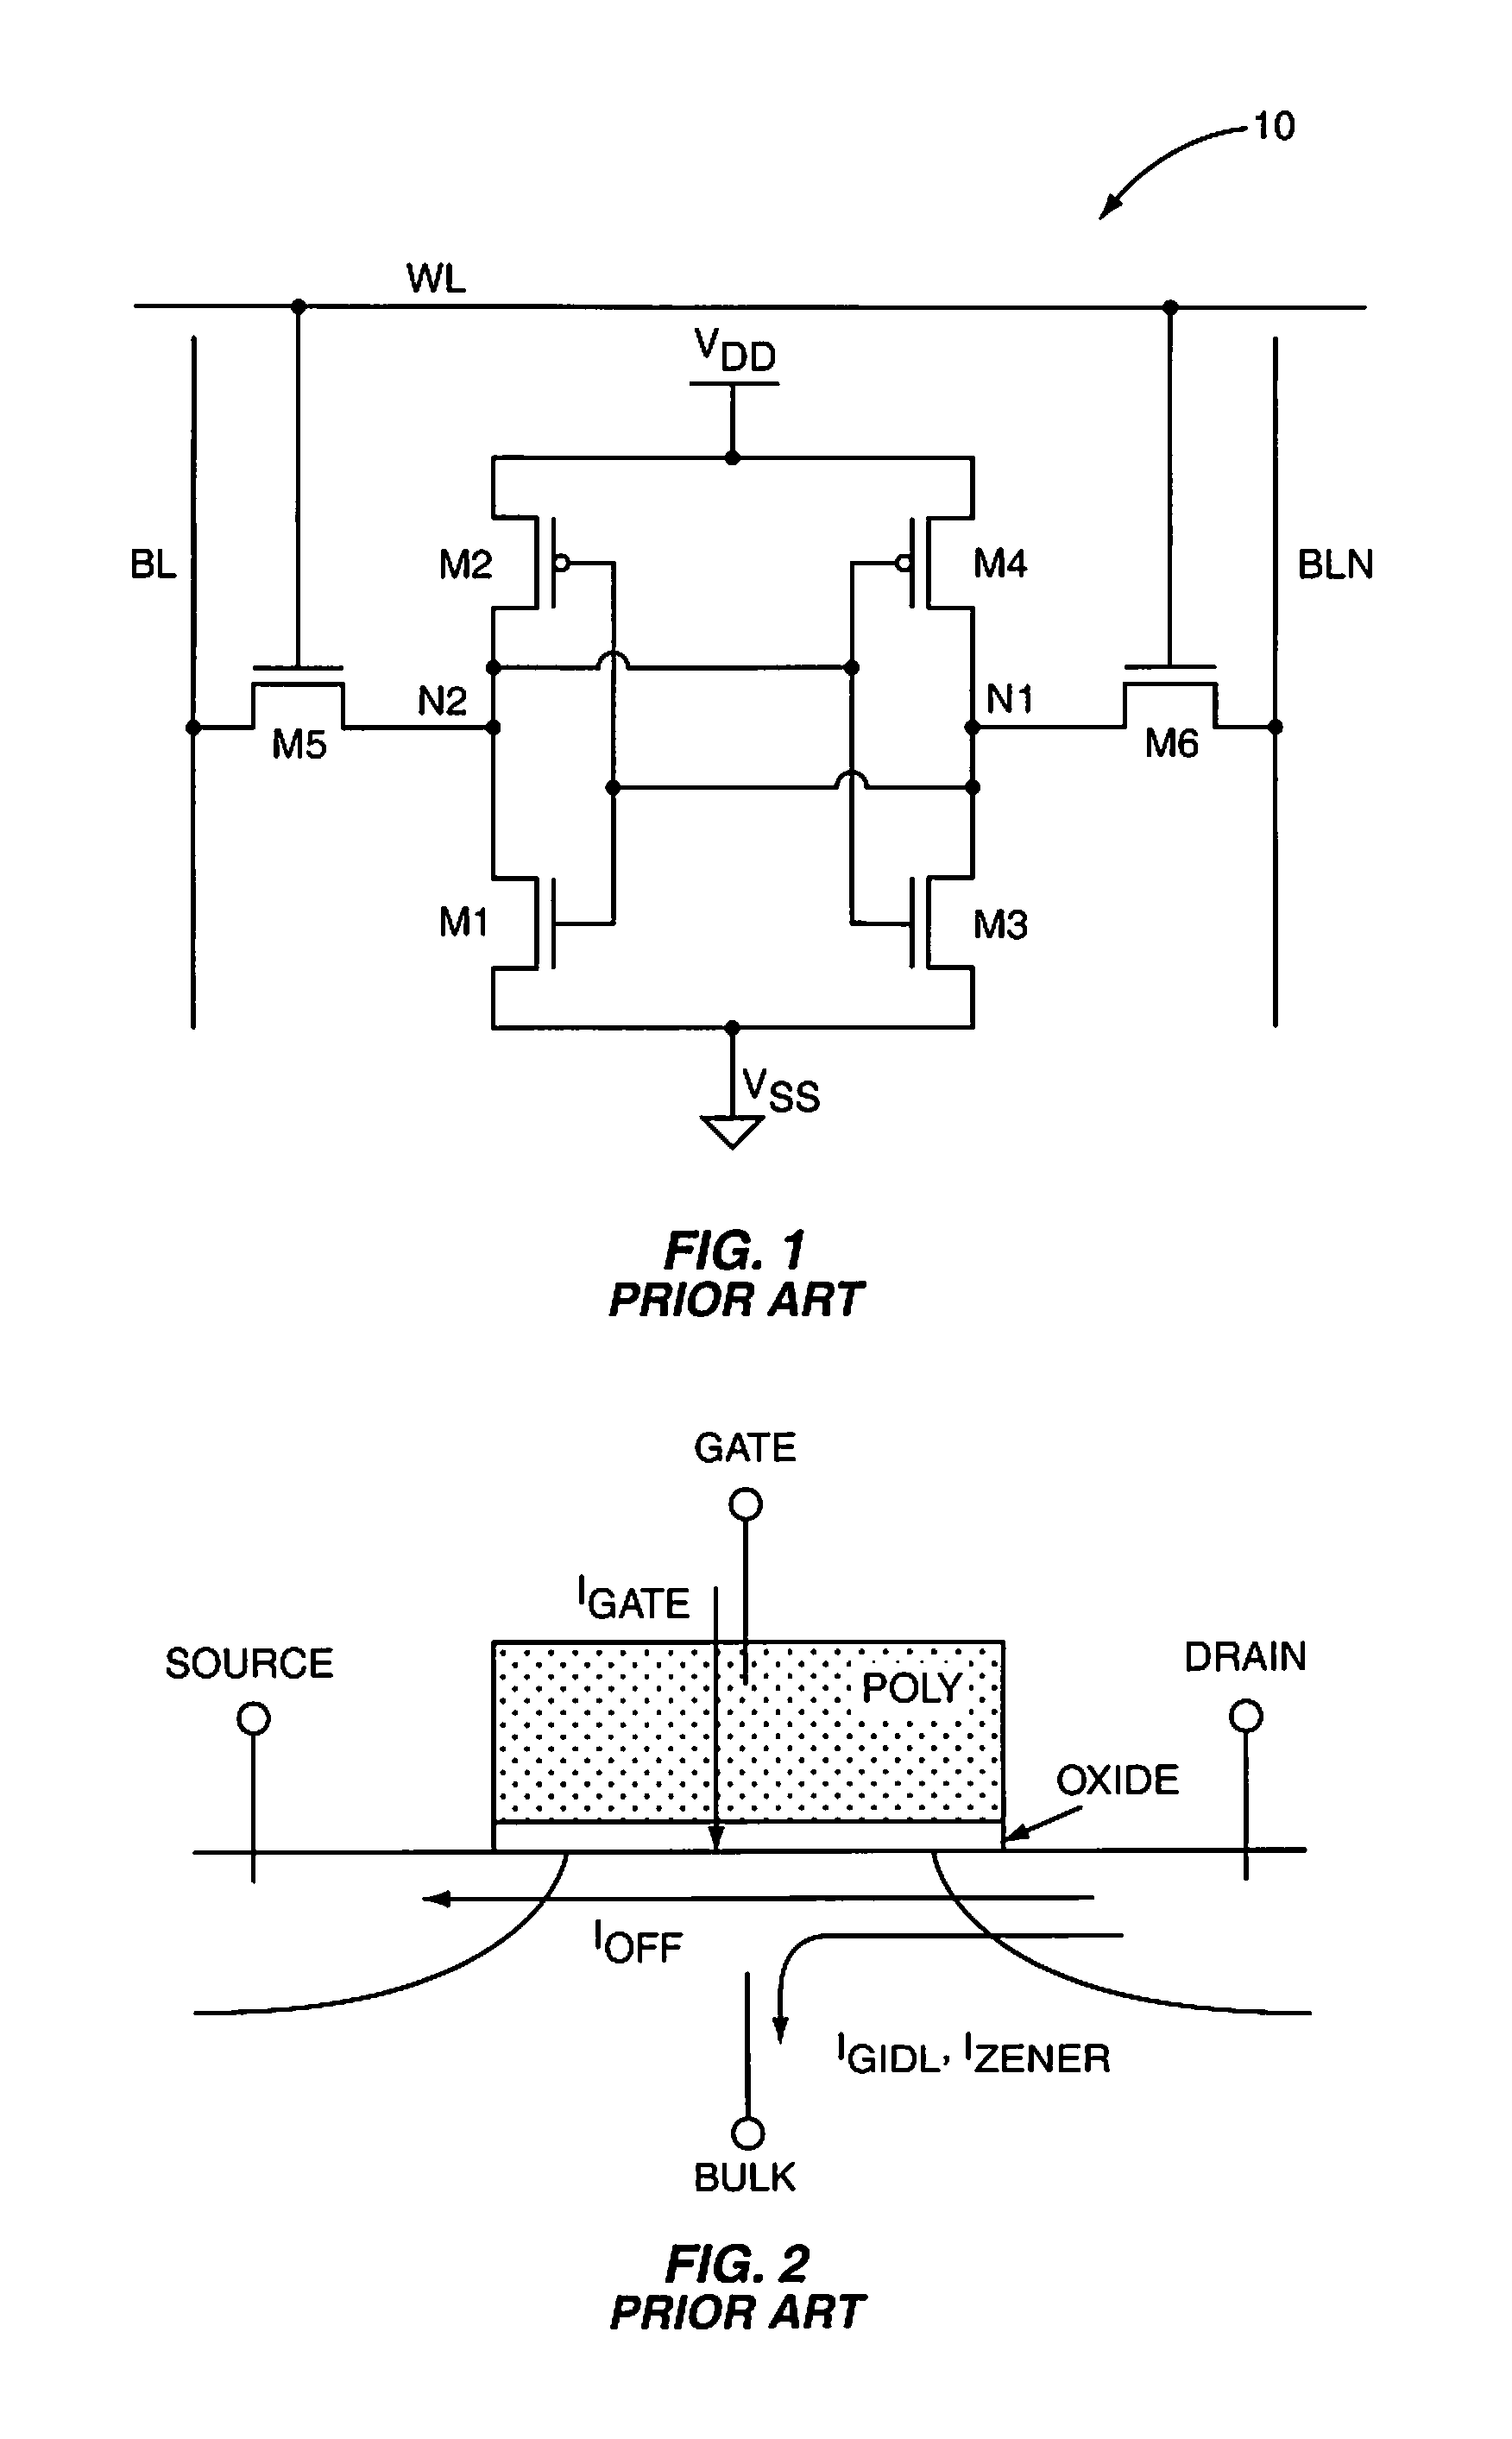 SRAM cell with intrinsically high stability and low leakage